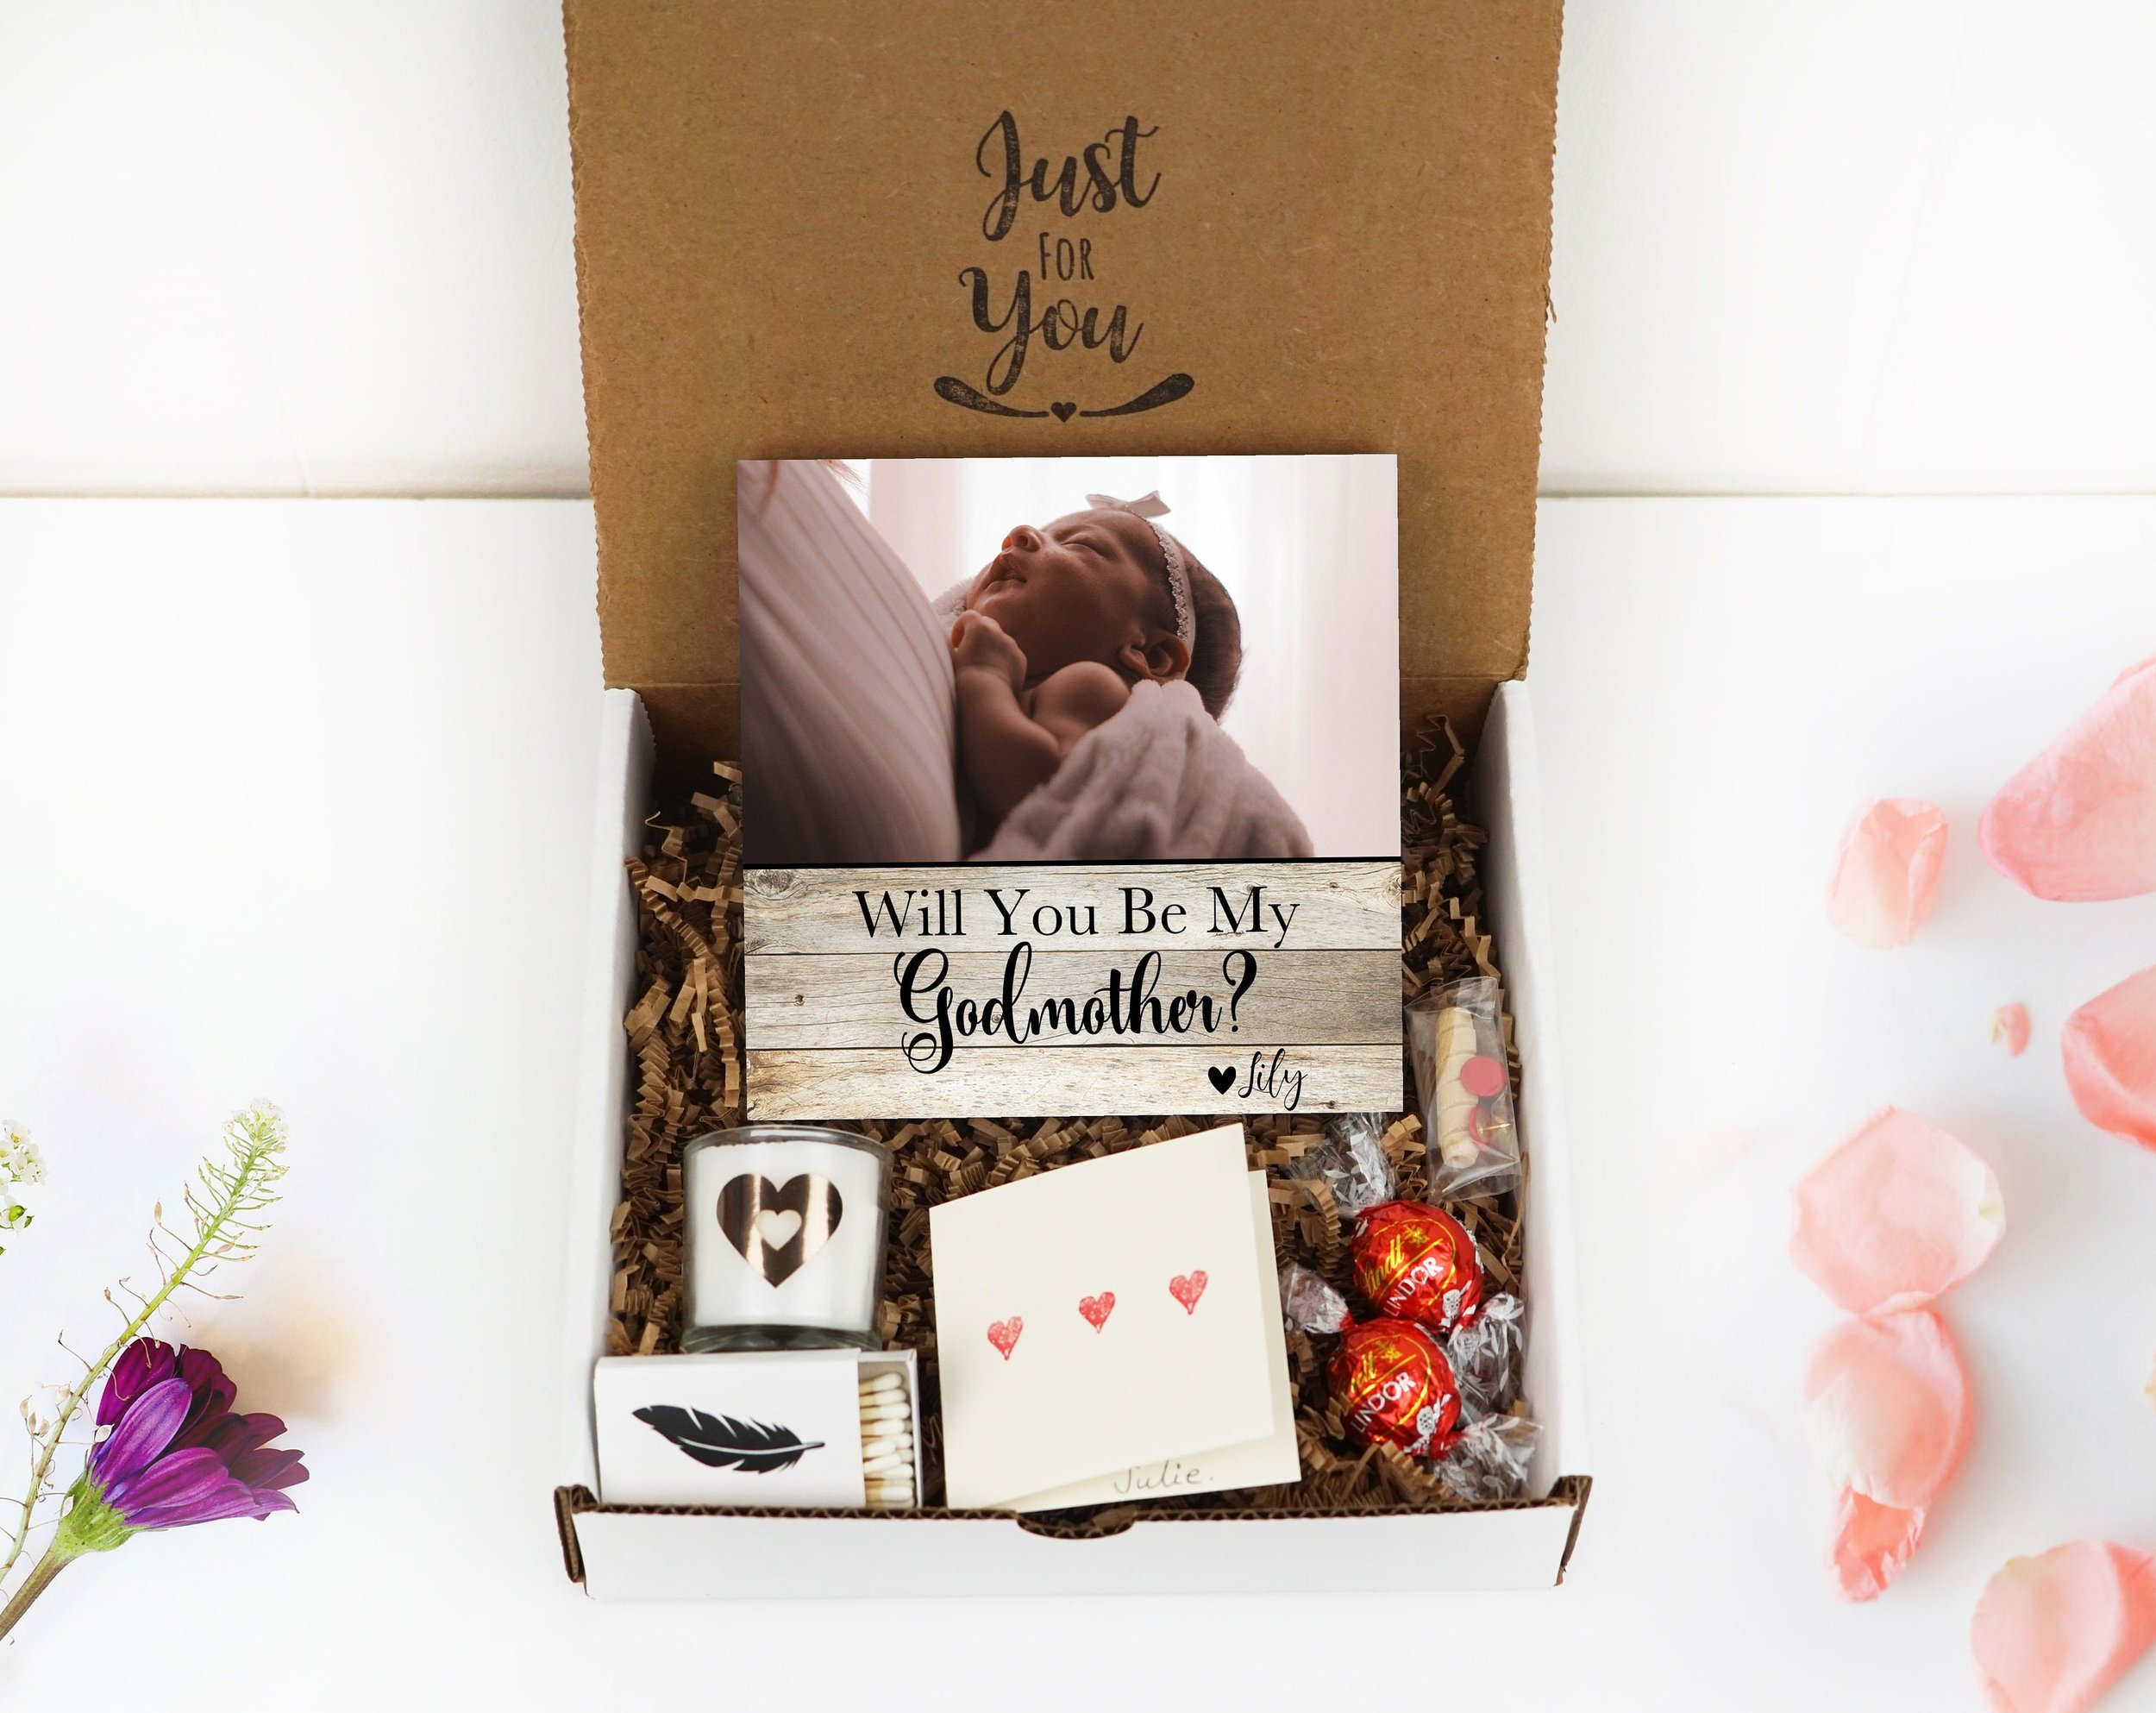 Details about   Personalized Godmother Gift Custom Godmother Proposal Will You Be My Godmother 